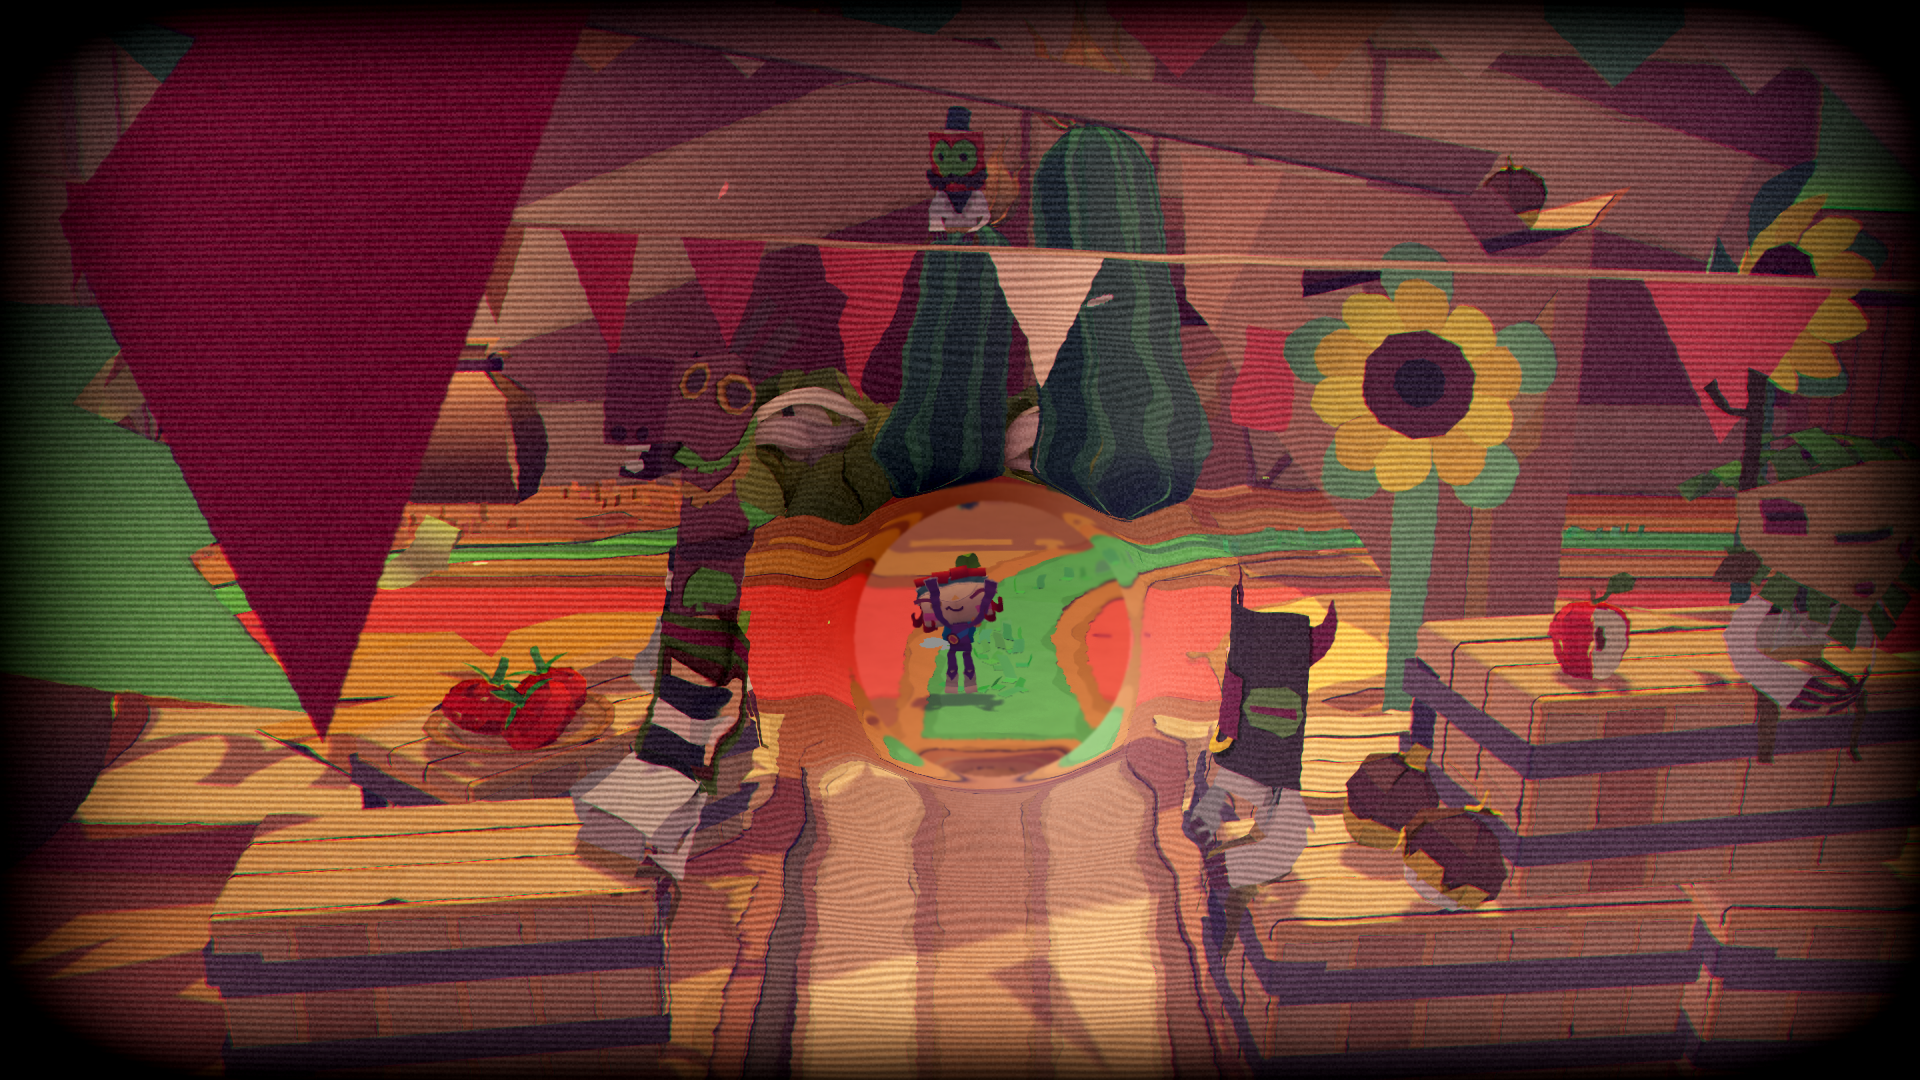 Tearaway Unfolded PSX Preview